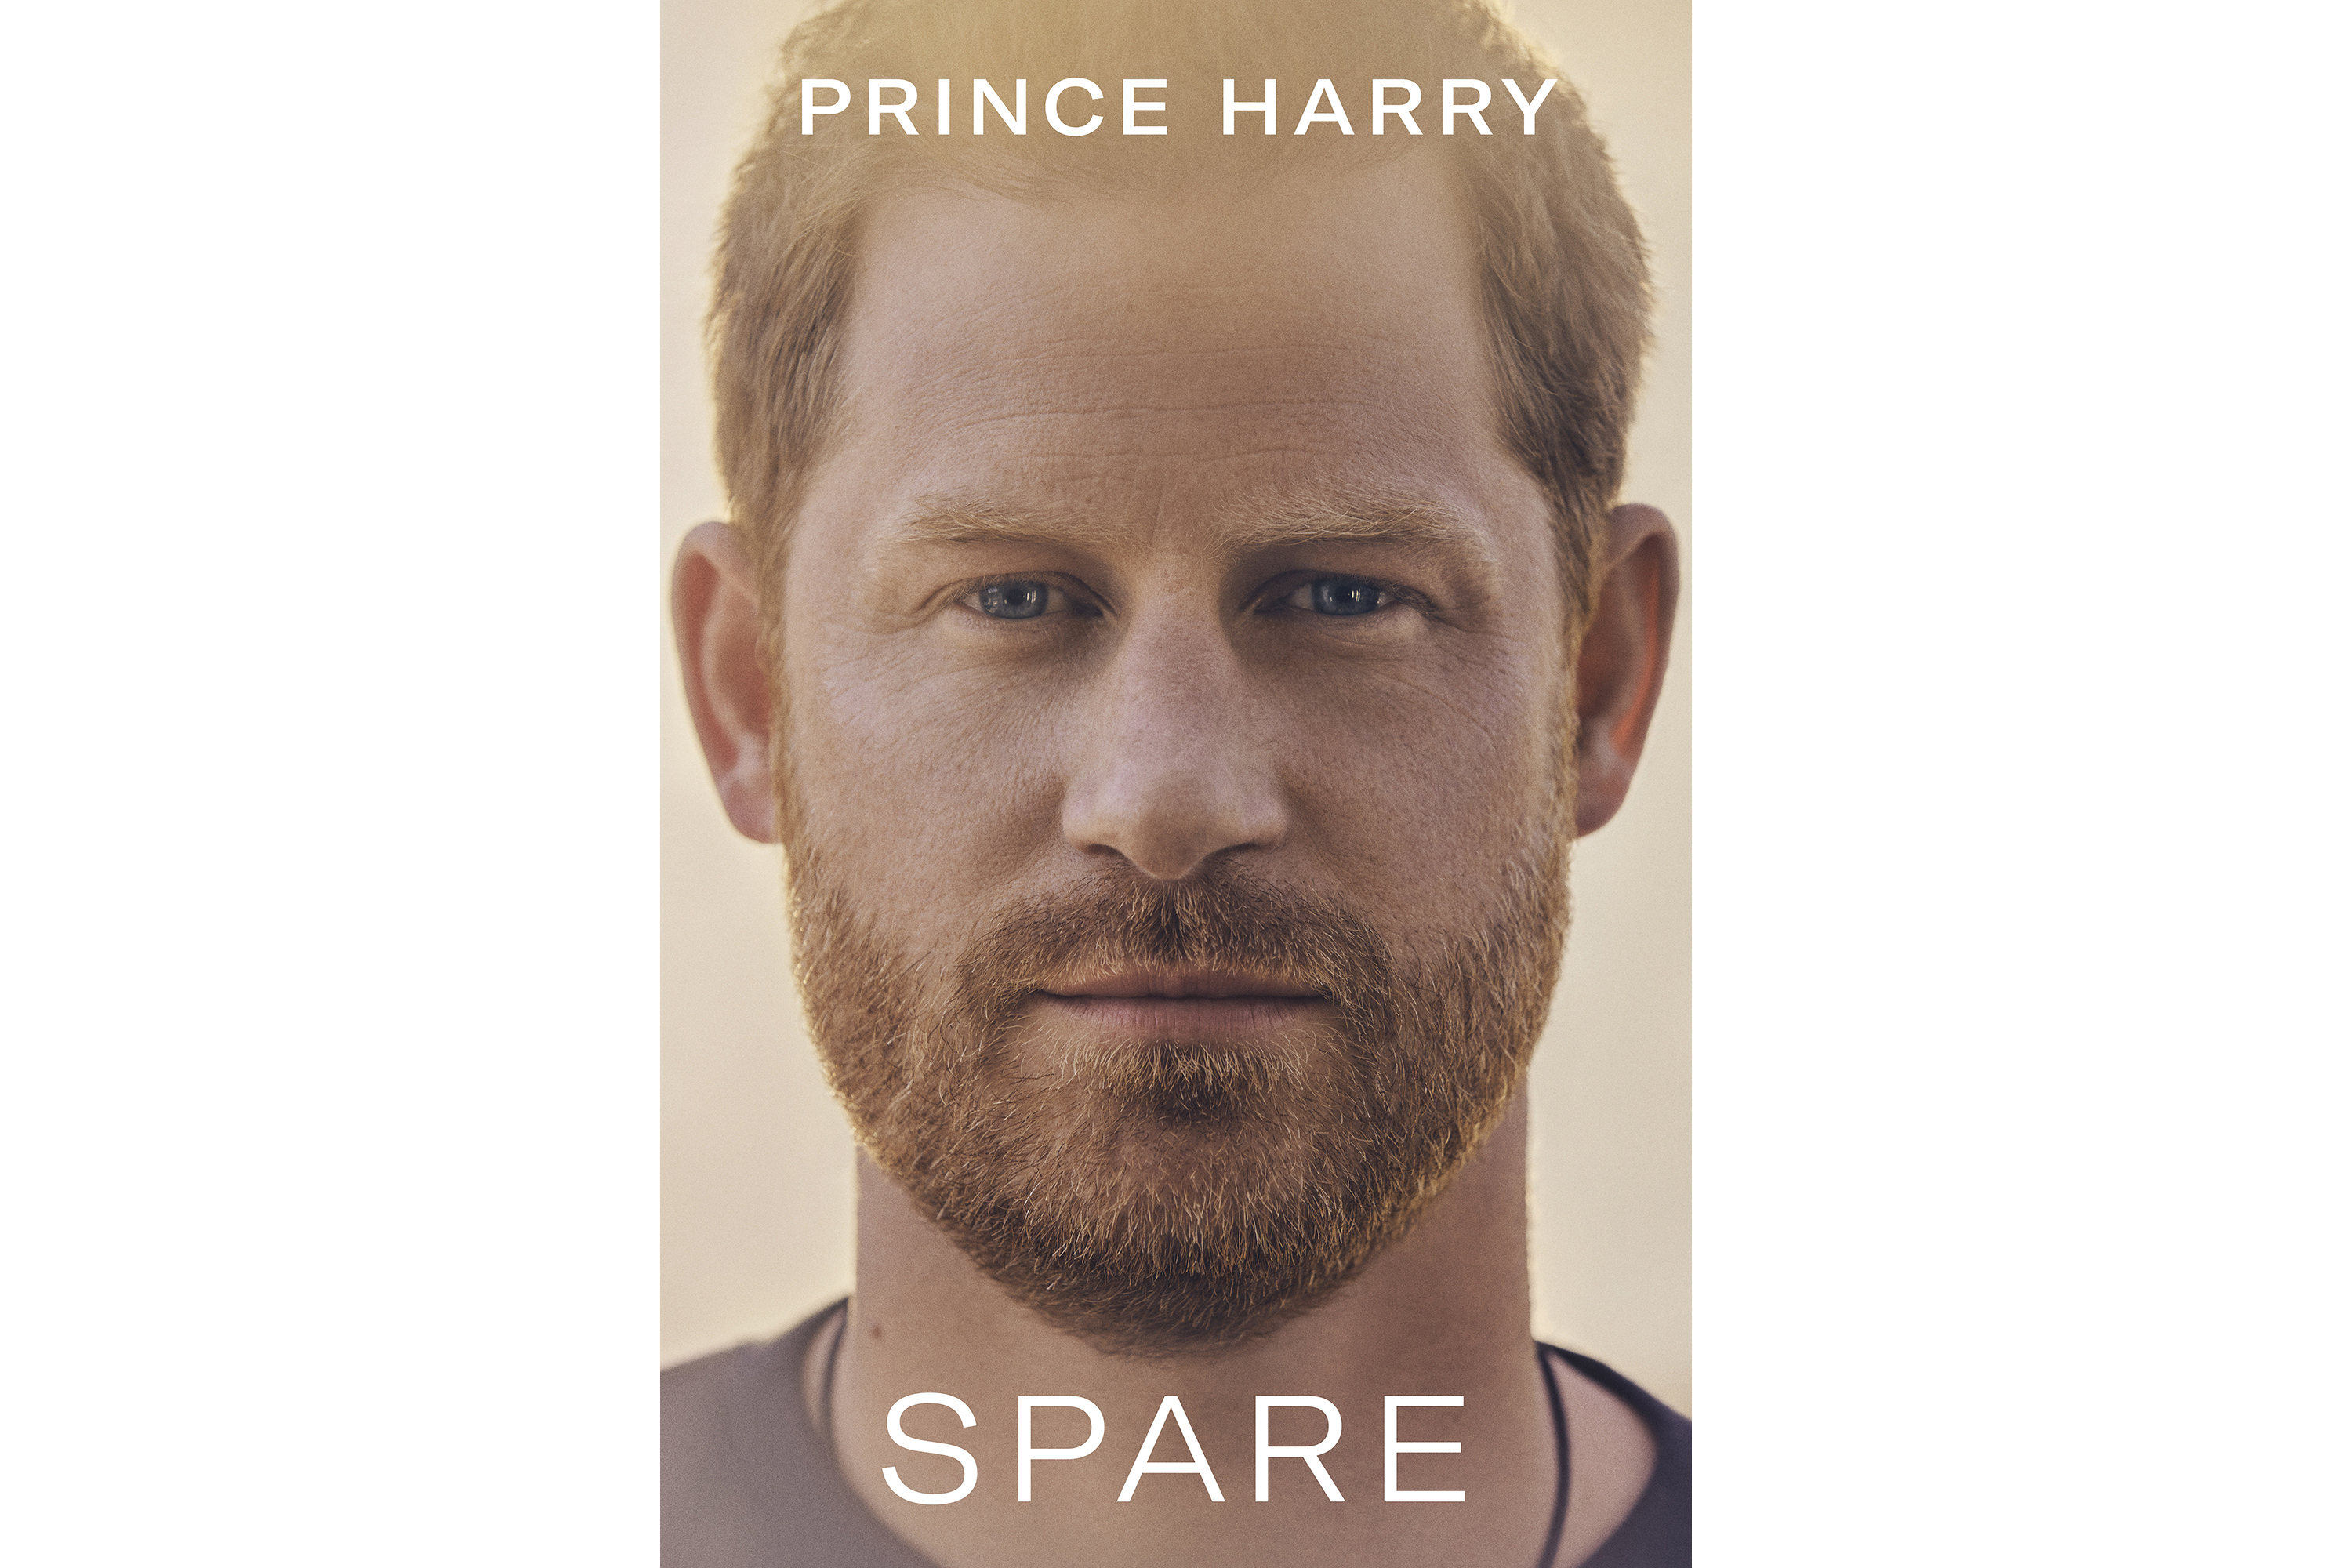 Prince Harry's memoir, altd 'Spare,' to come out Jan. 10 - The